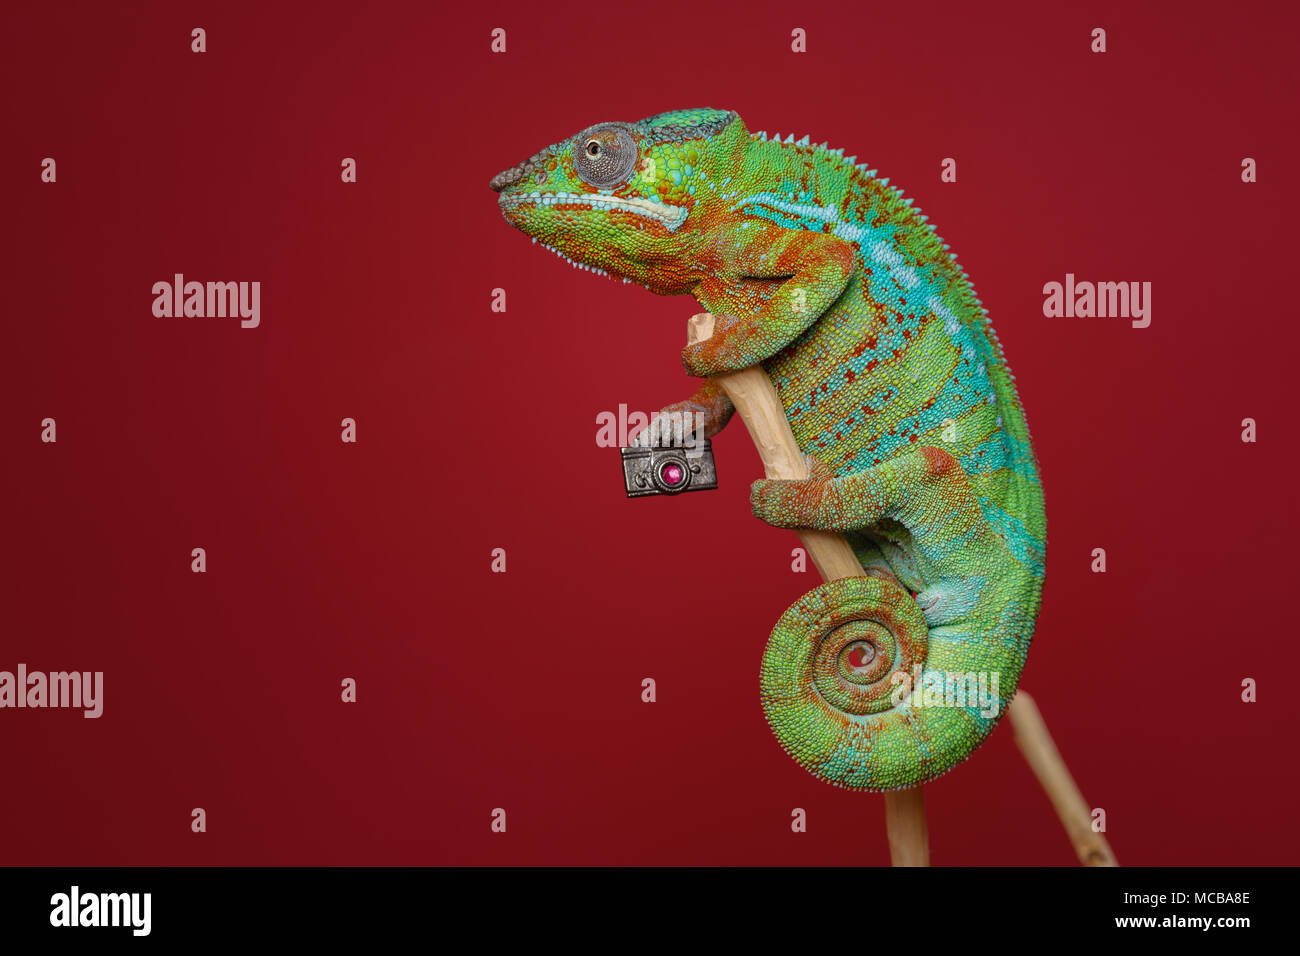 alive chameleon reptile holding small photo camera sitting on branch. studio shot over red background. copy space. Stock Photo